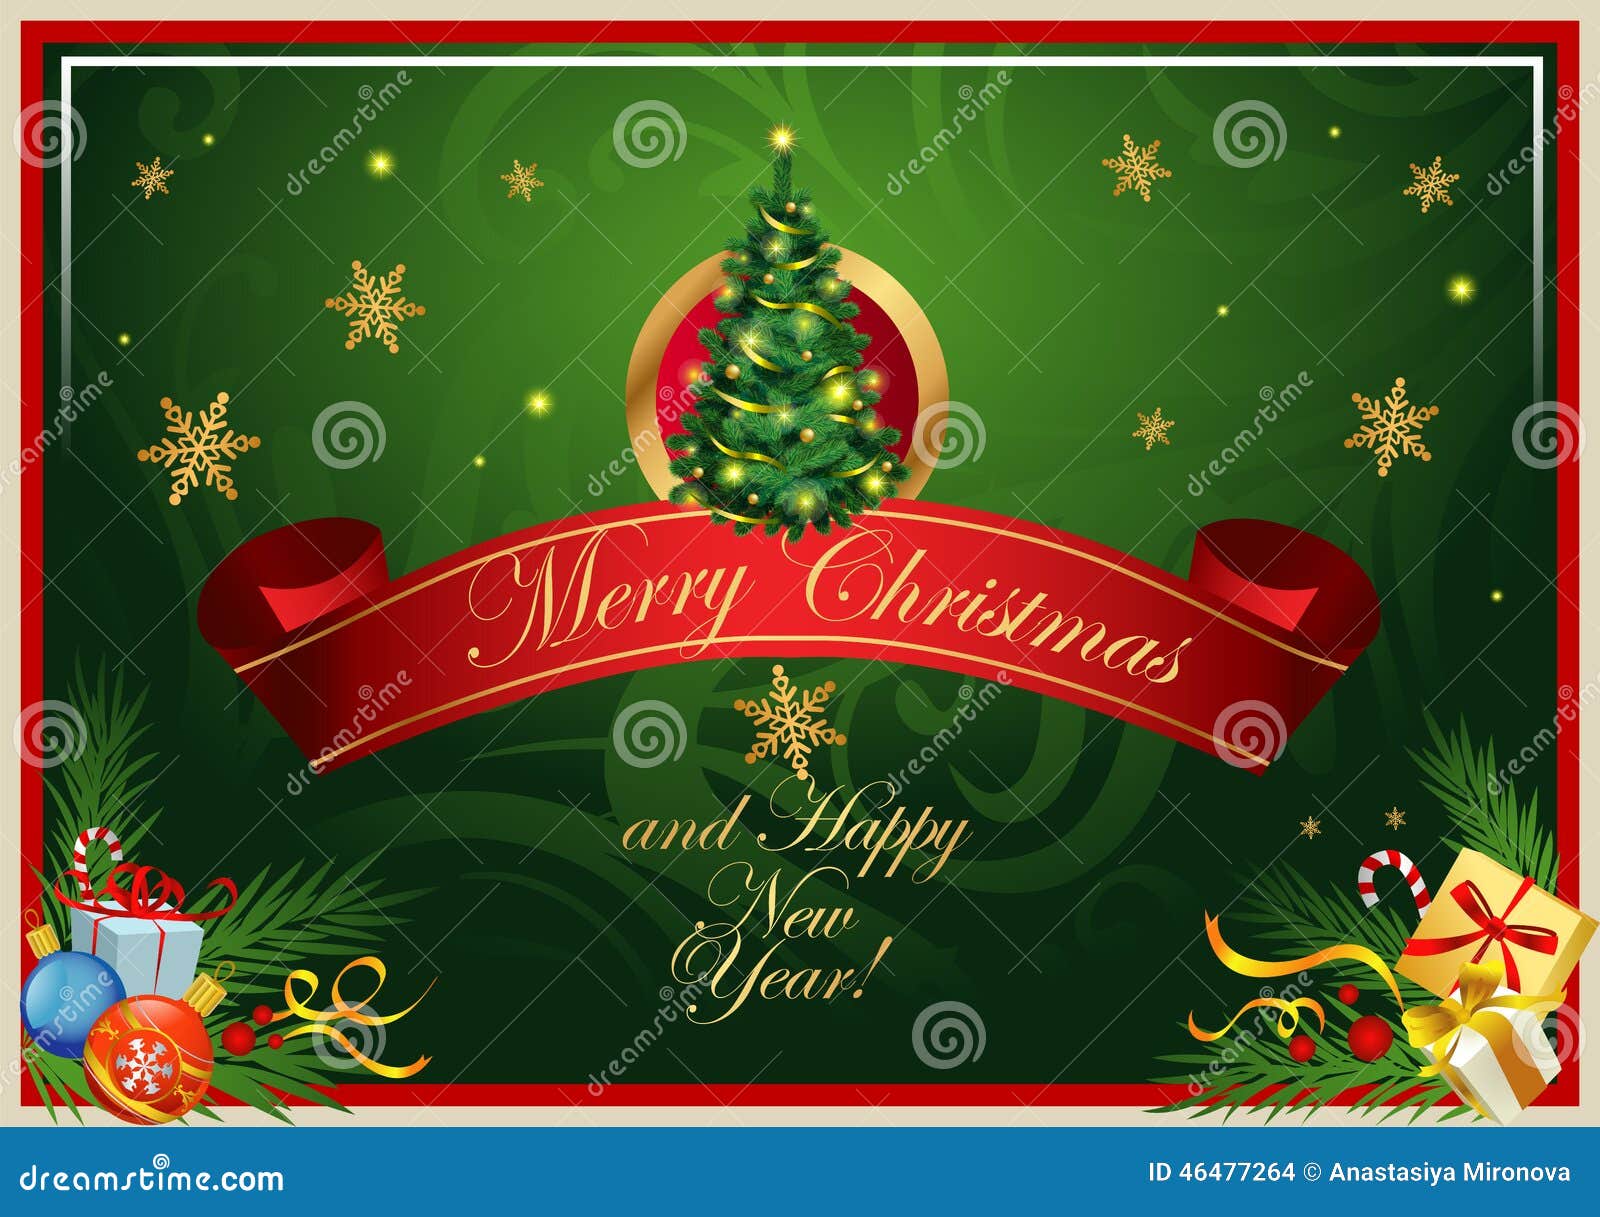 Classic Christmas Card Stock Vector - Image: 46477264